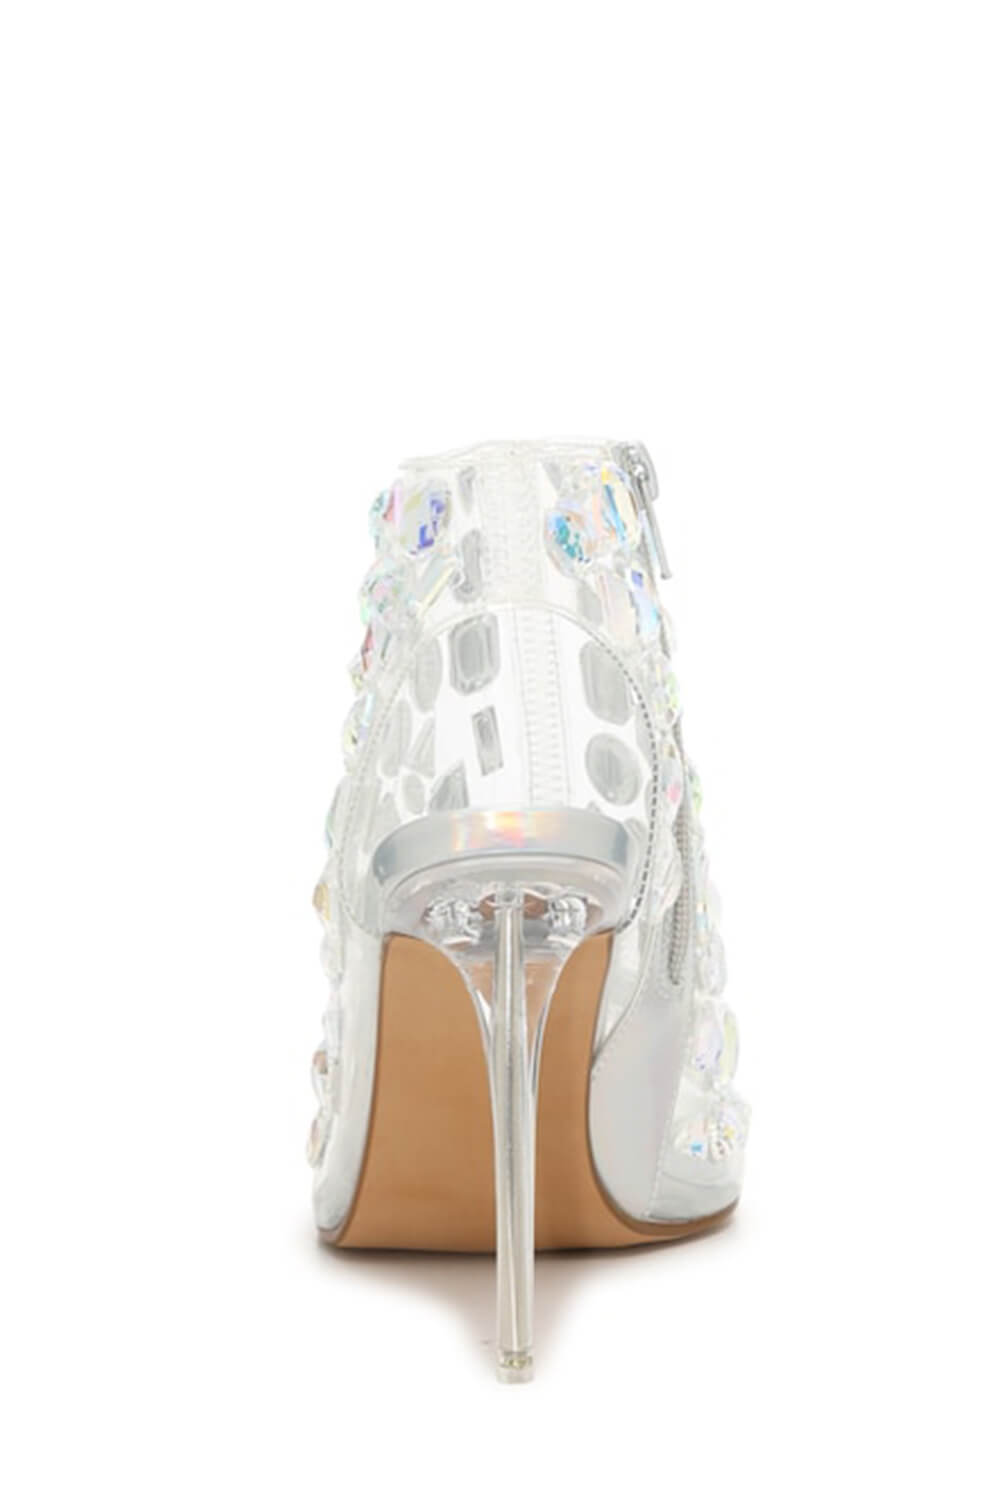 Clear Perspex Rhinestone-Studded Square Peep Toe Ankle Stiletto Bootie